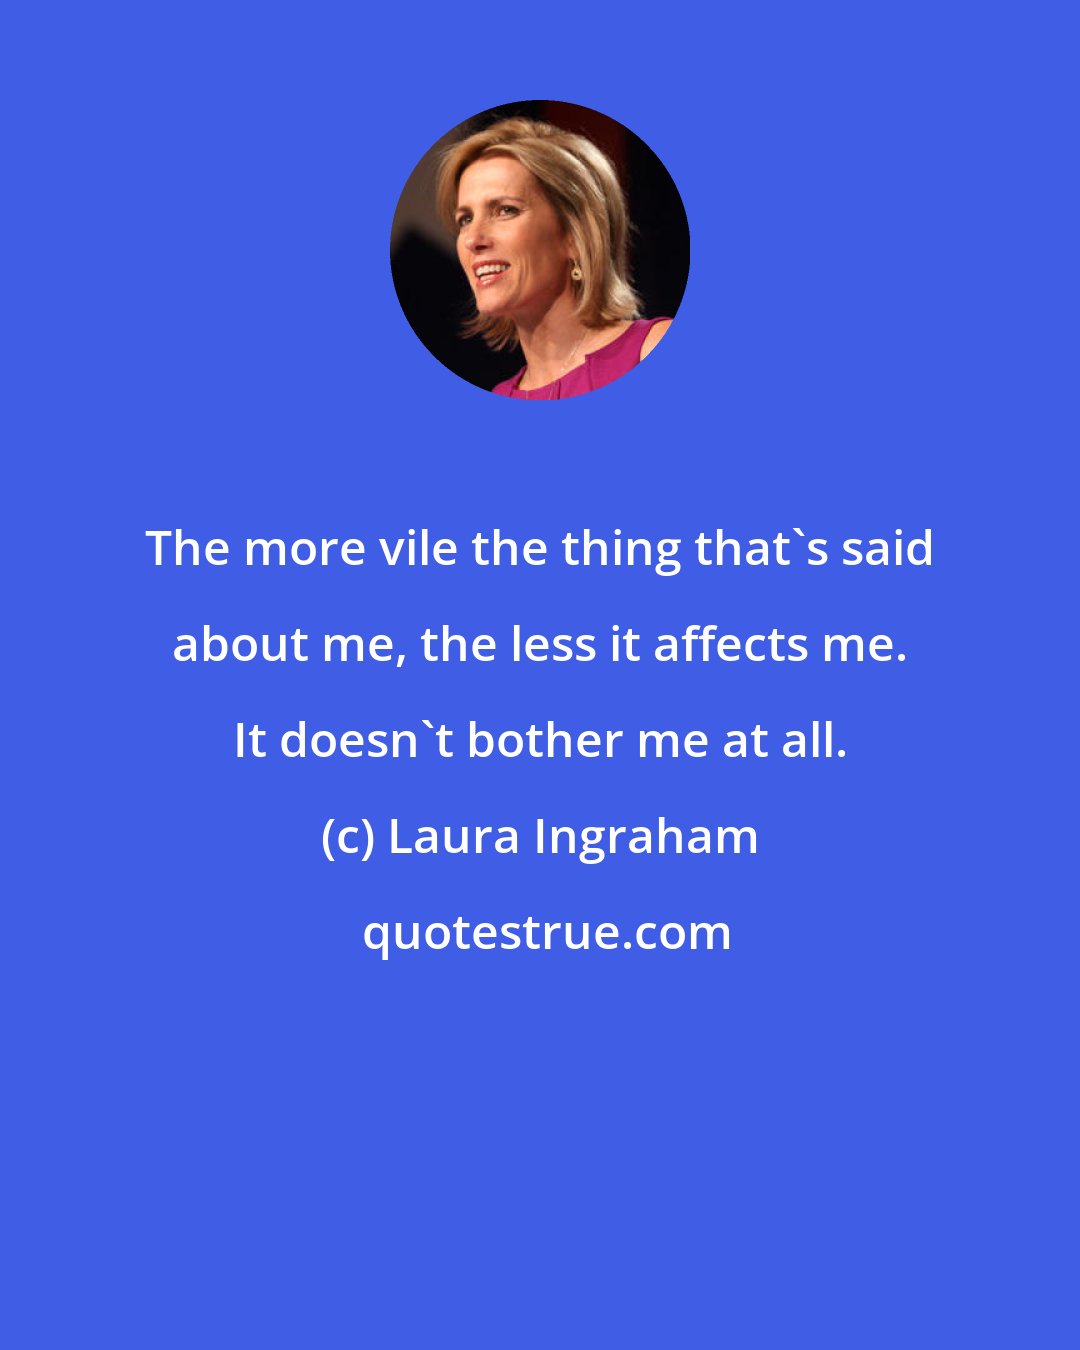 Laura Ingraham: The more vile the thing that's said about me, the less it affects me. It doesn't bother me at all.